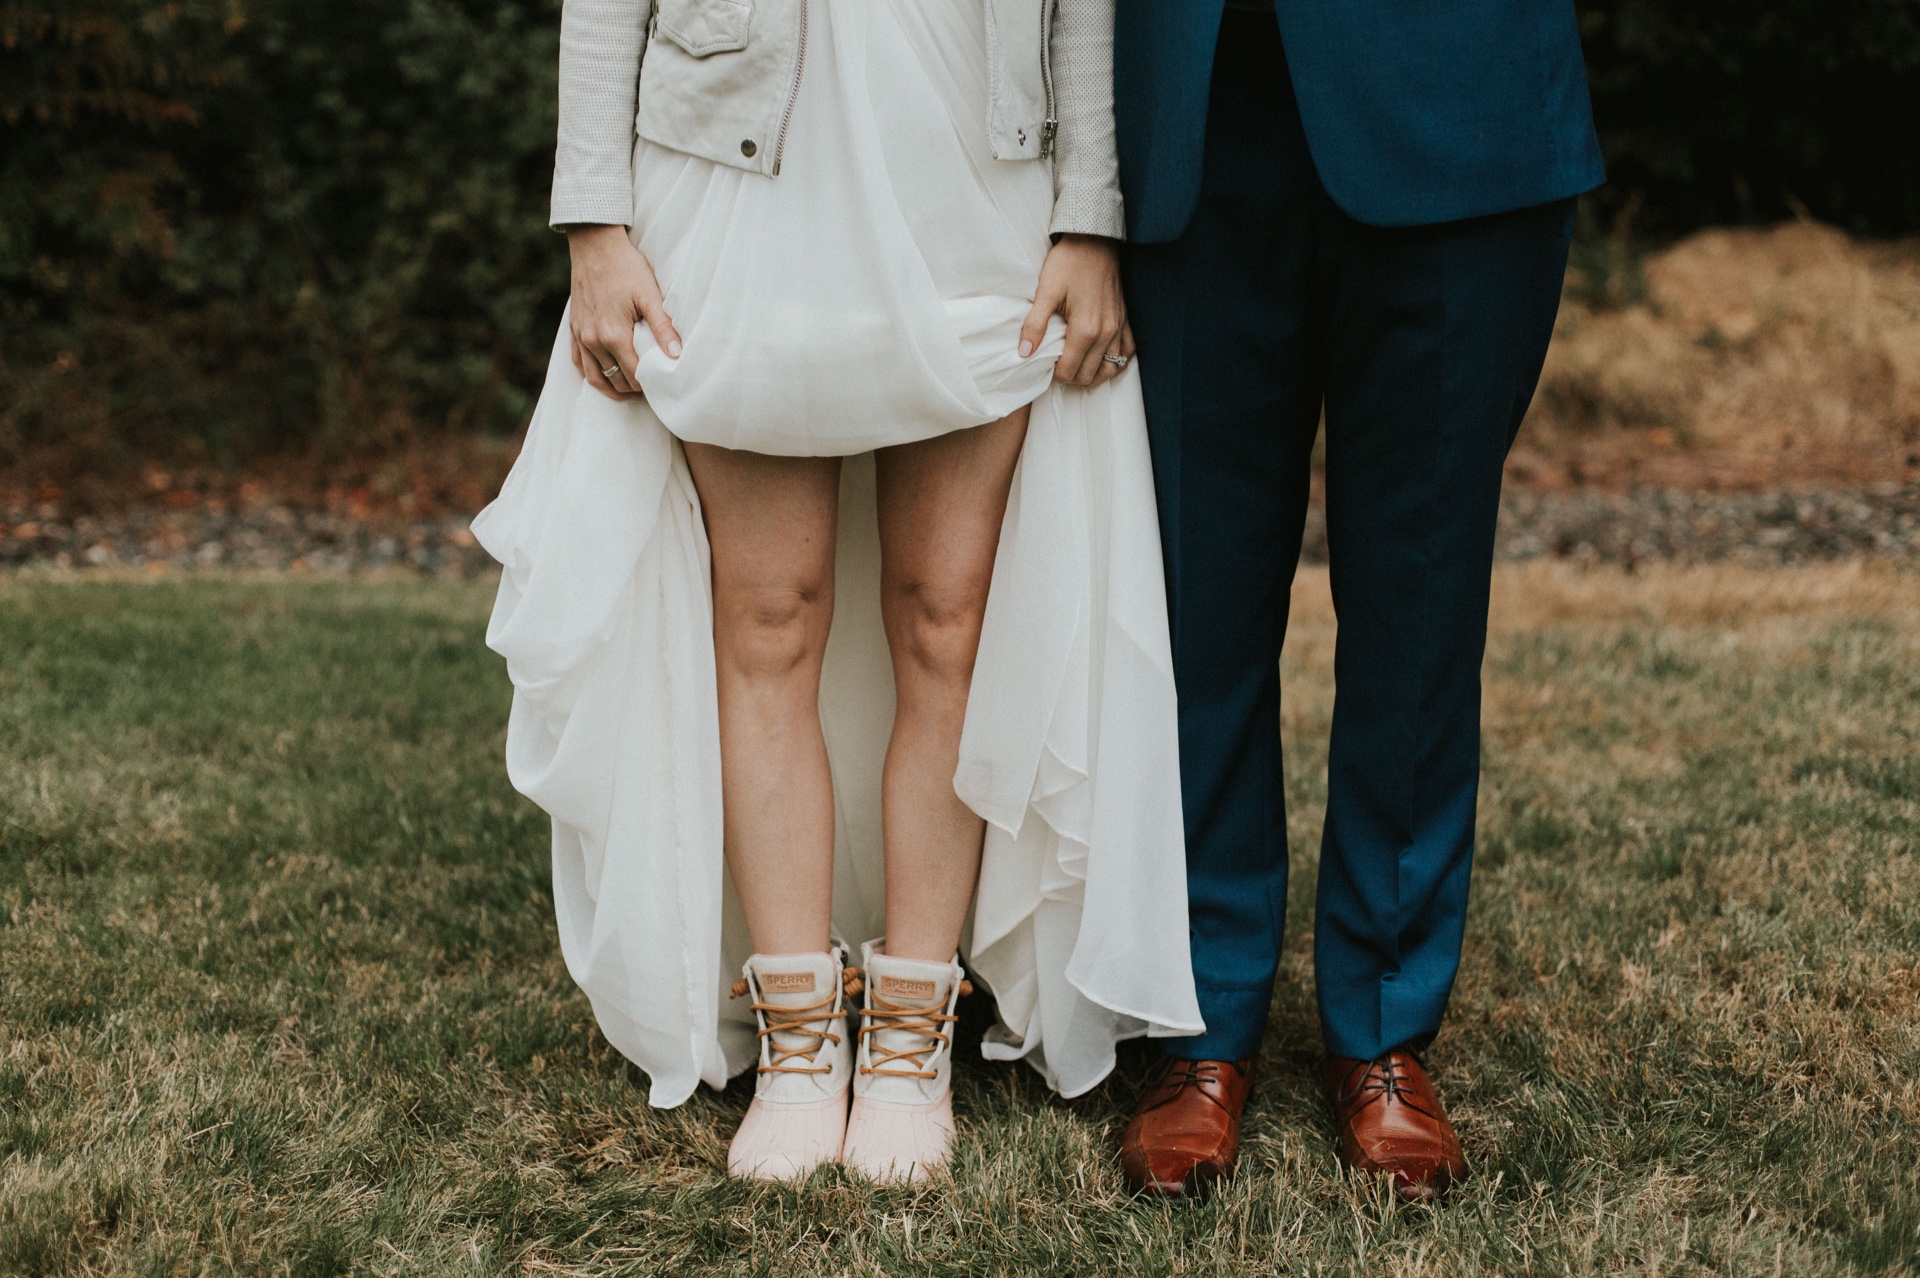 Rainy Intimate Seattle Wedding by Sarah Anne Photography